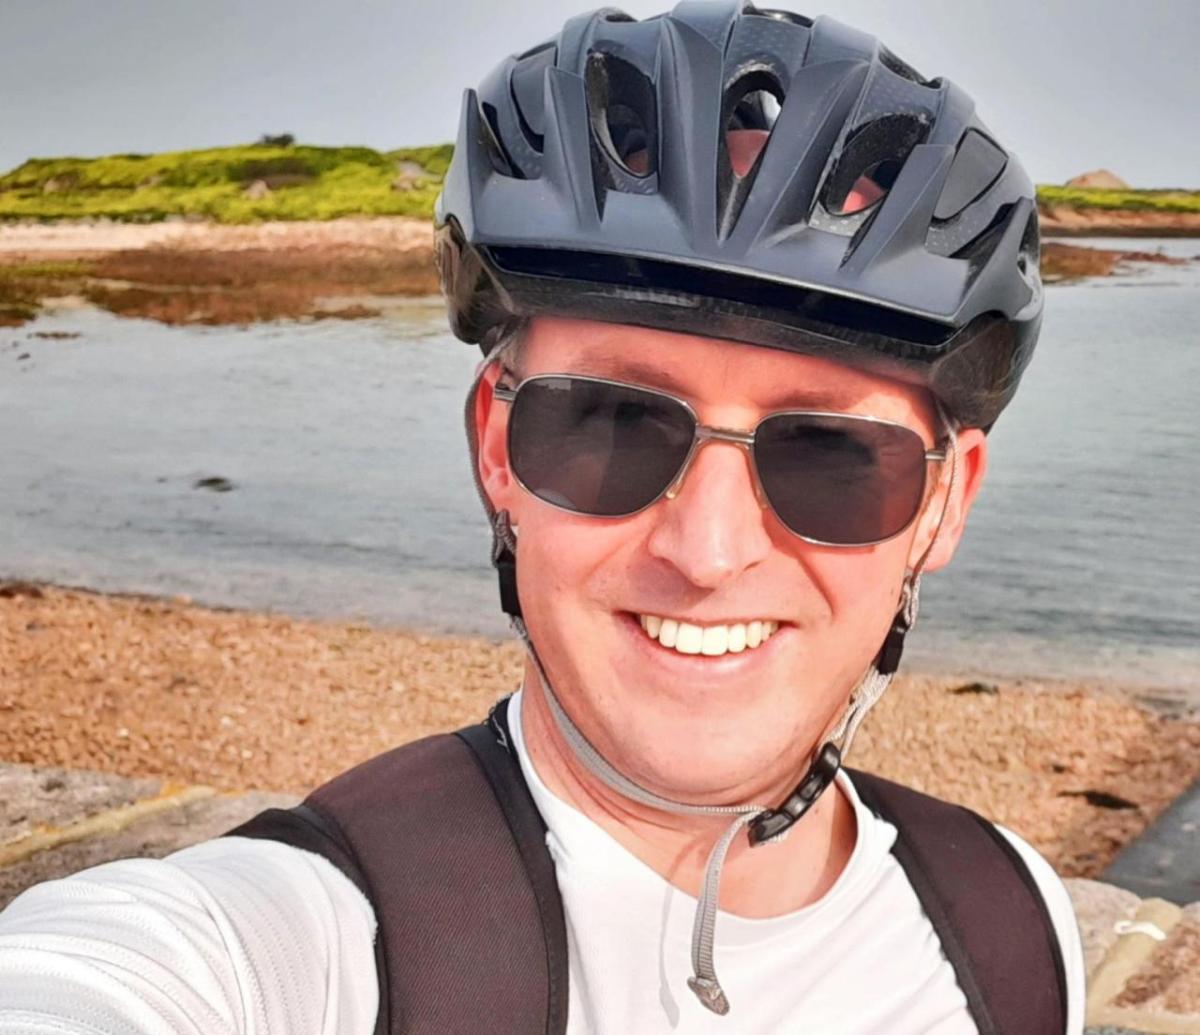 A person in a bike helmet and sunglasses